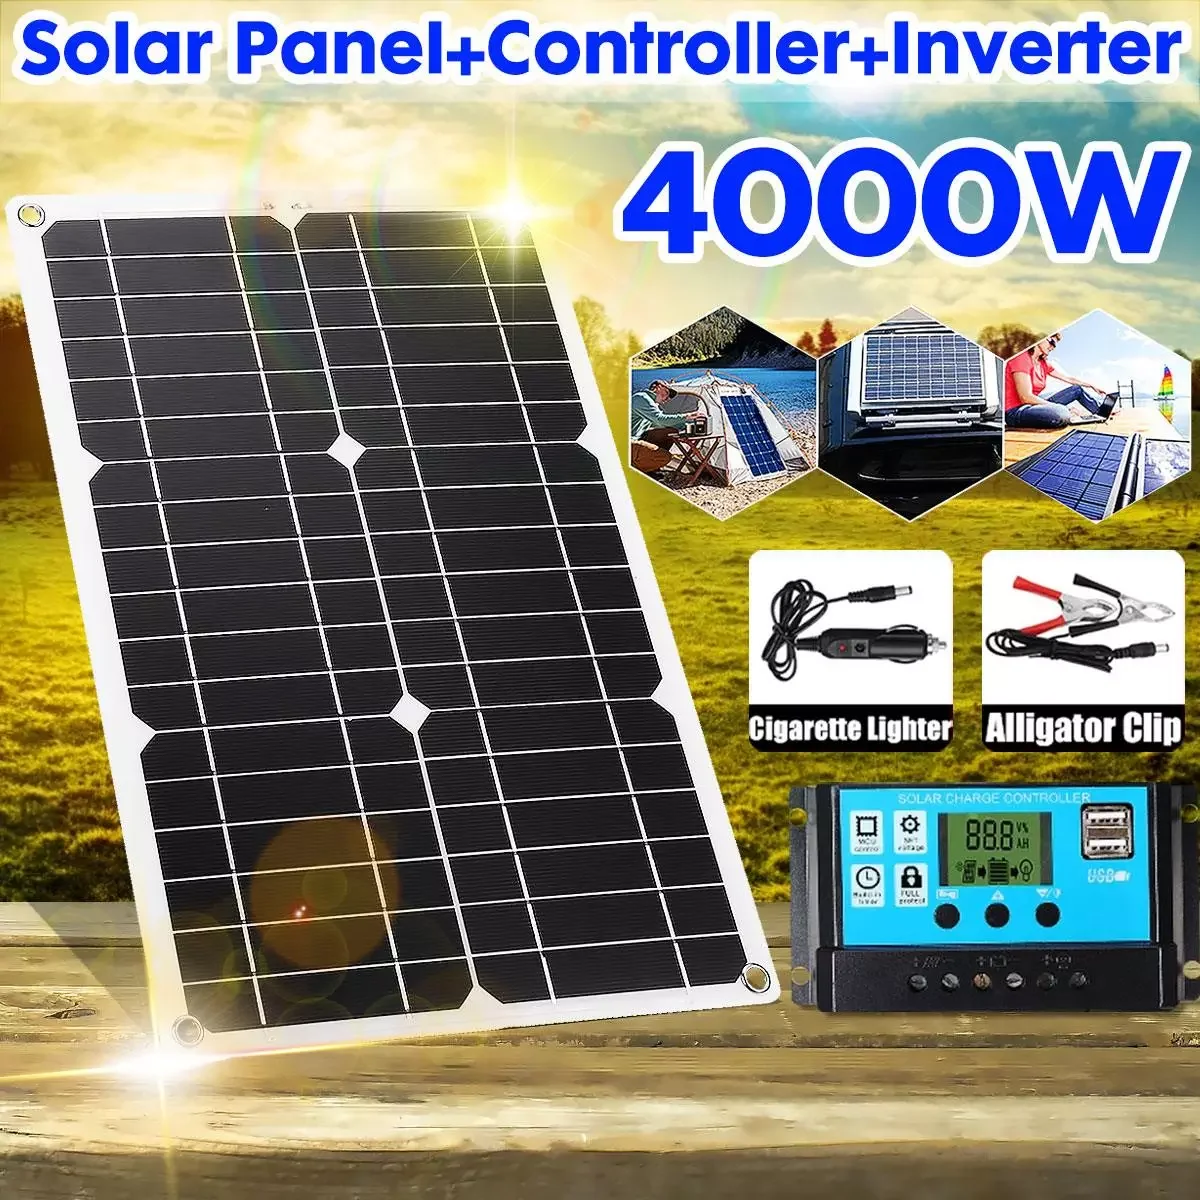 

110V/220V Solar Power System 20W Solar Panel Battery Charger 4000W Solar Inverter Complete Kit Solar Controller 30A/40A/50A/60A